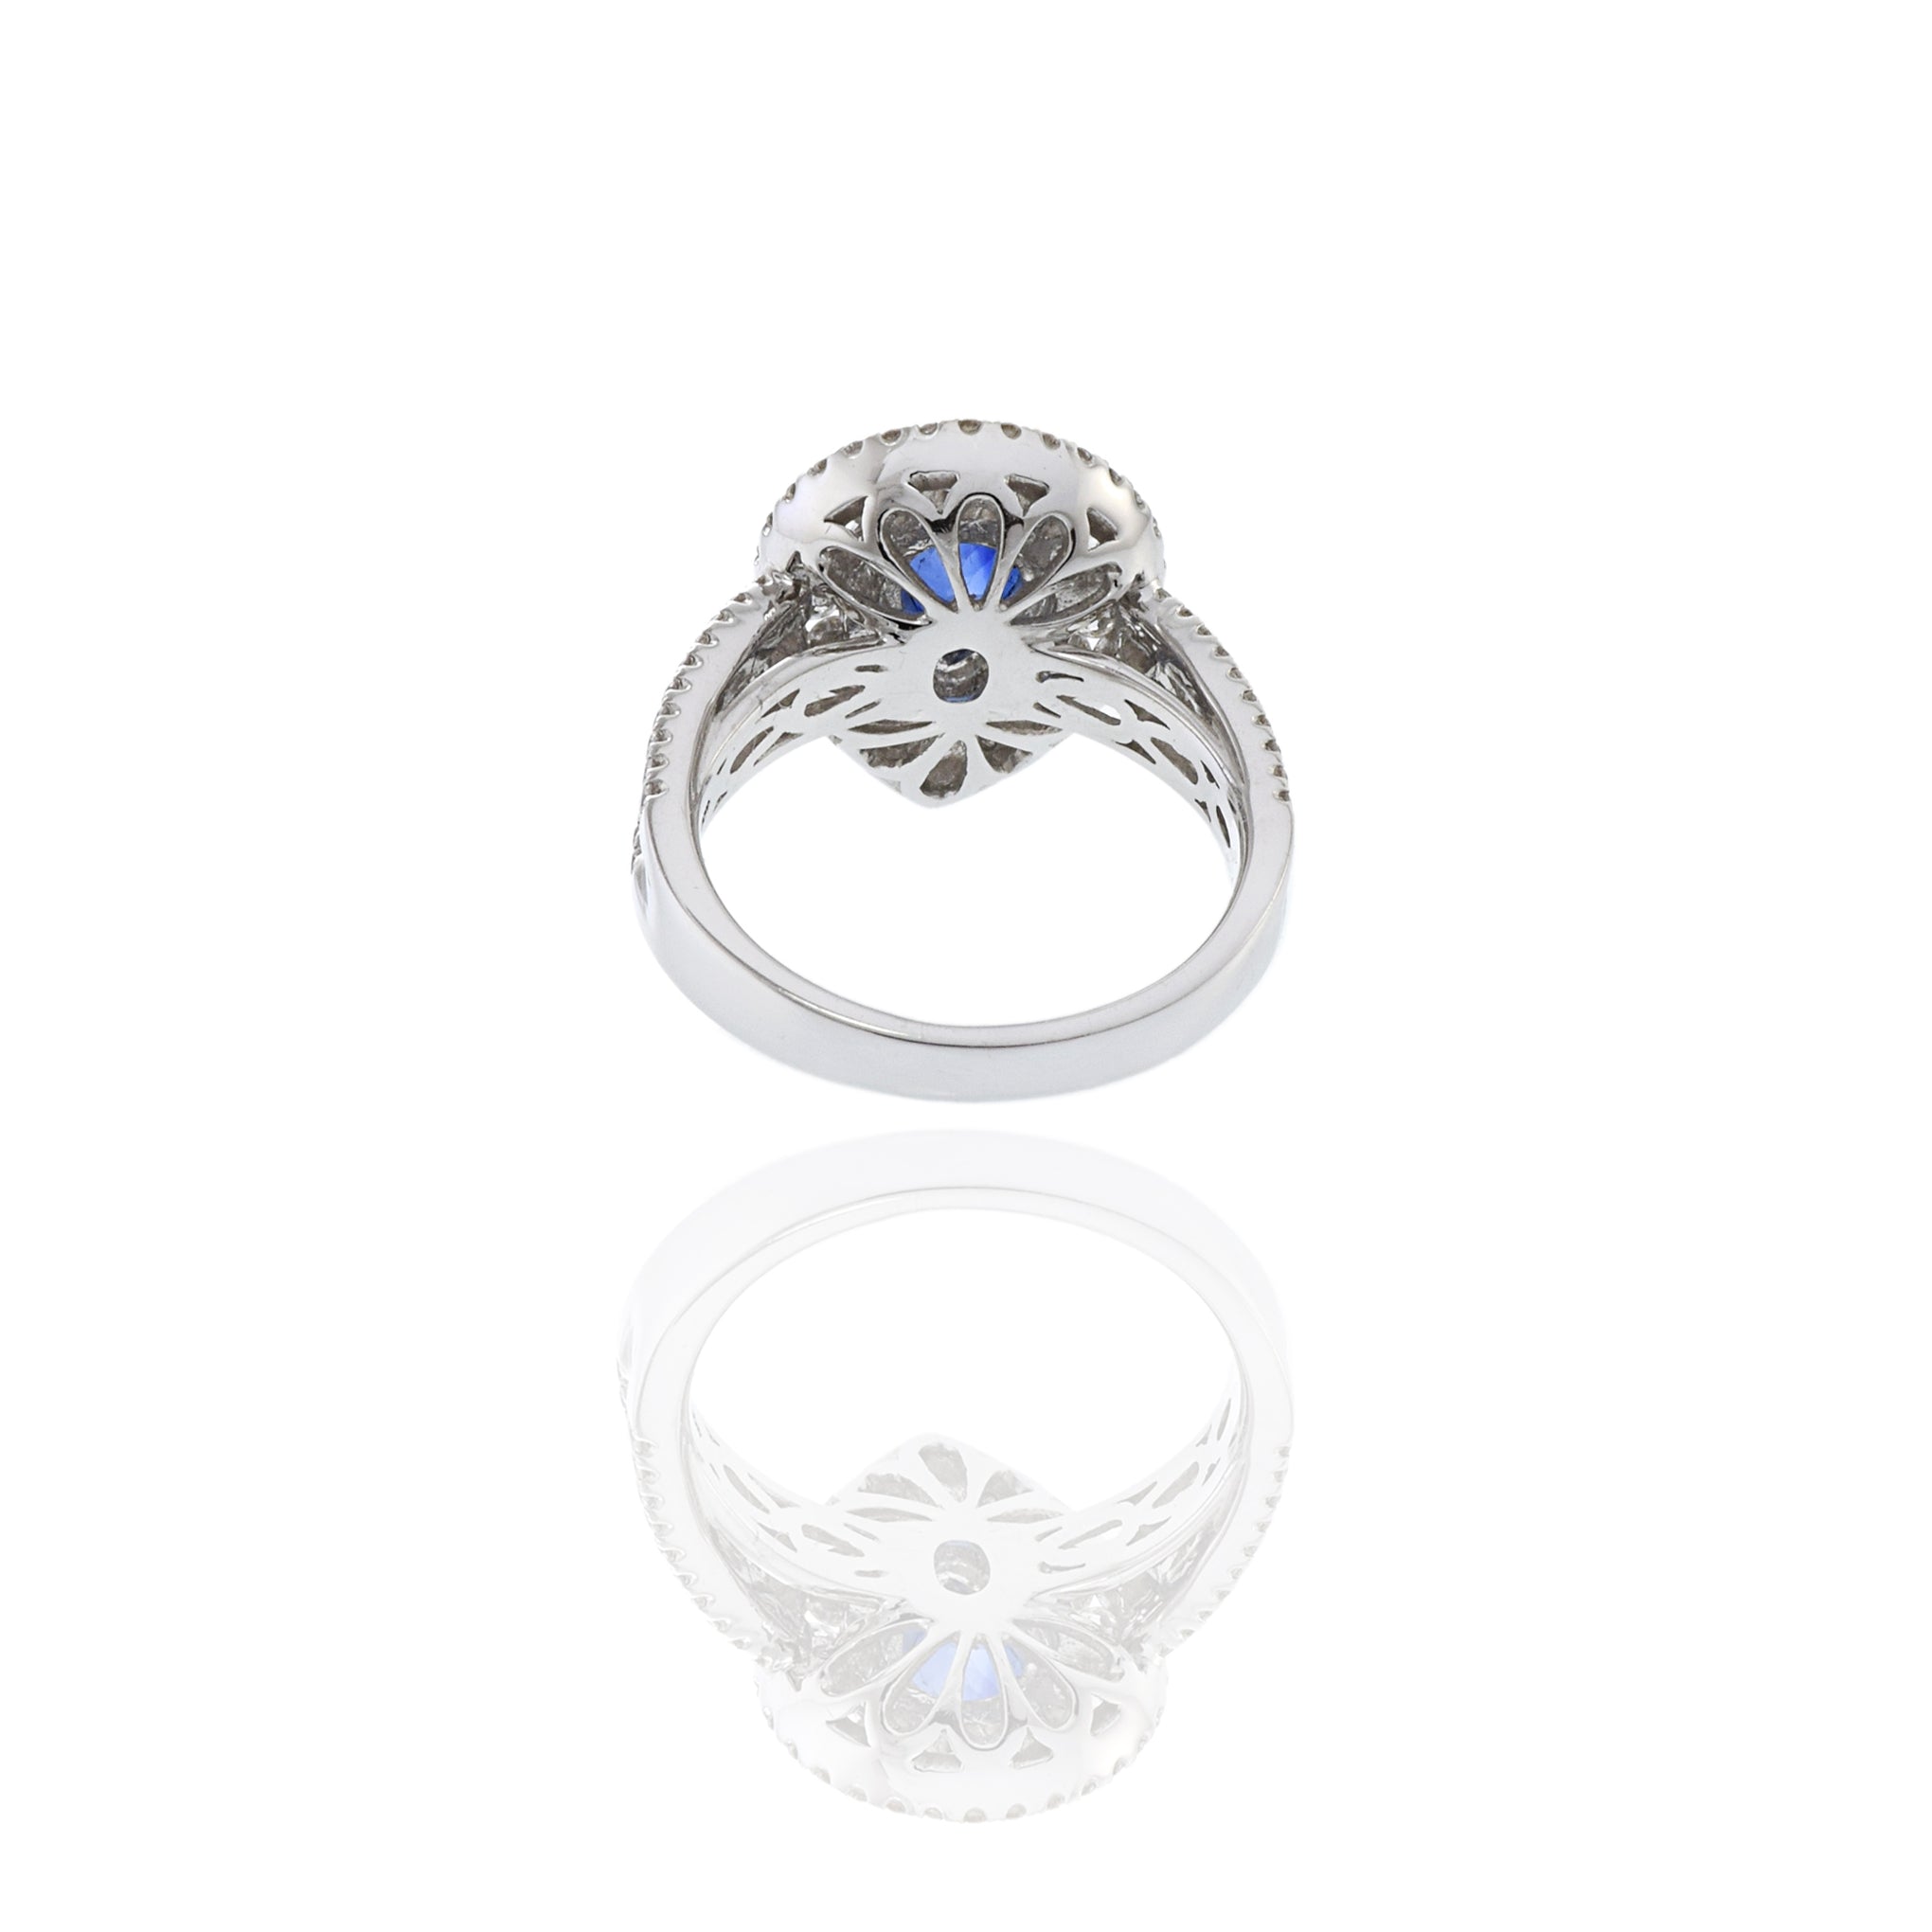 18KT White Gold Pear Shaped Blue Sapphire And Diamond Ring